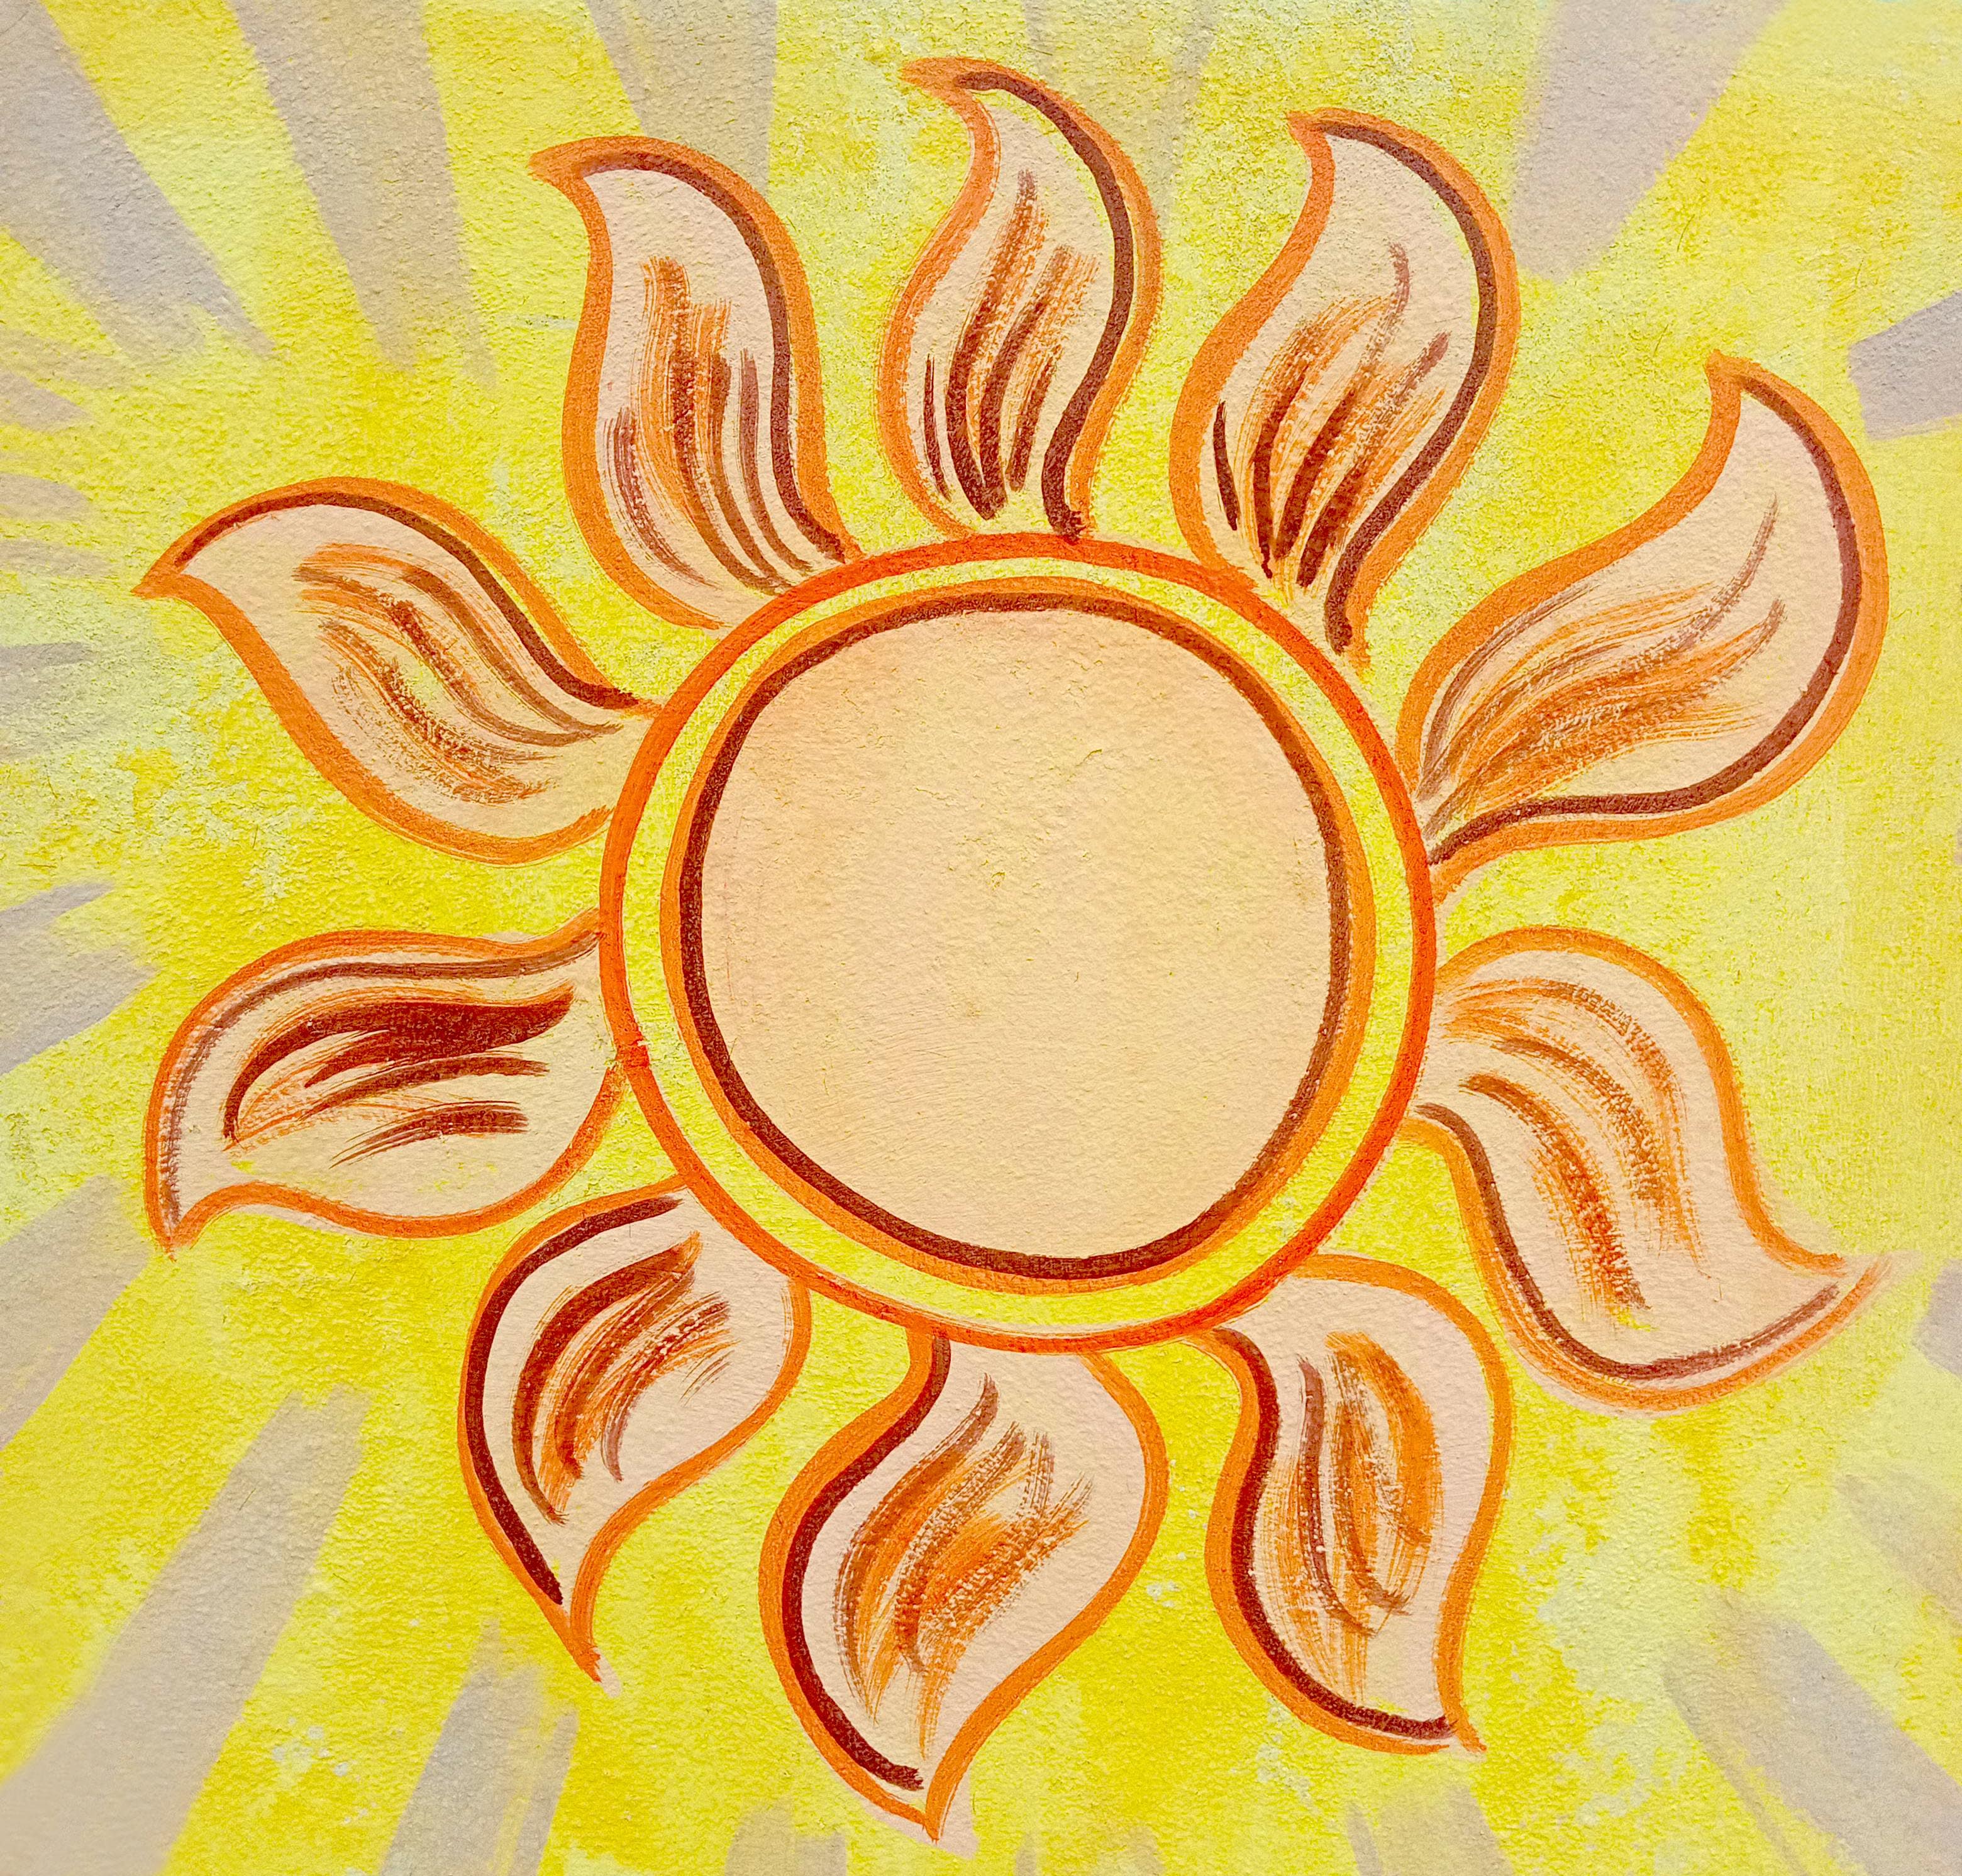 Sun Painting on Wall Images